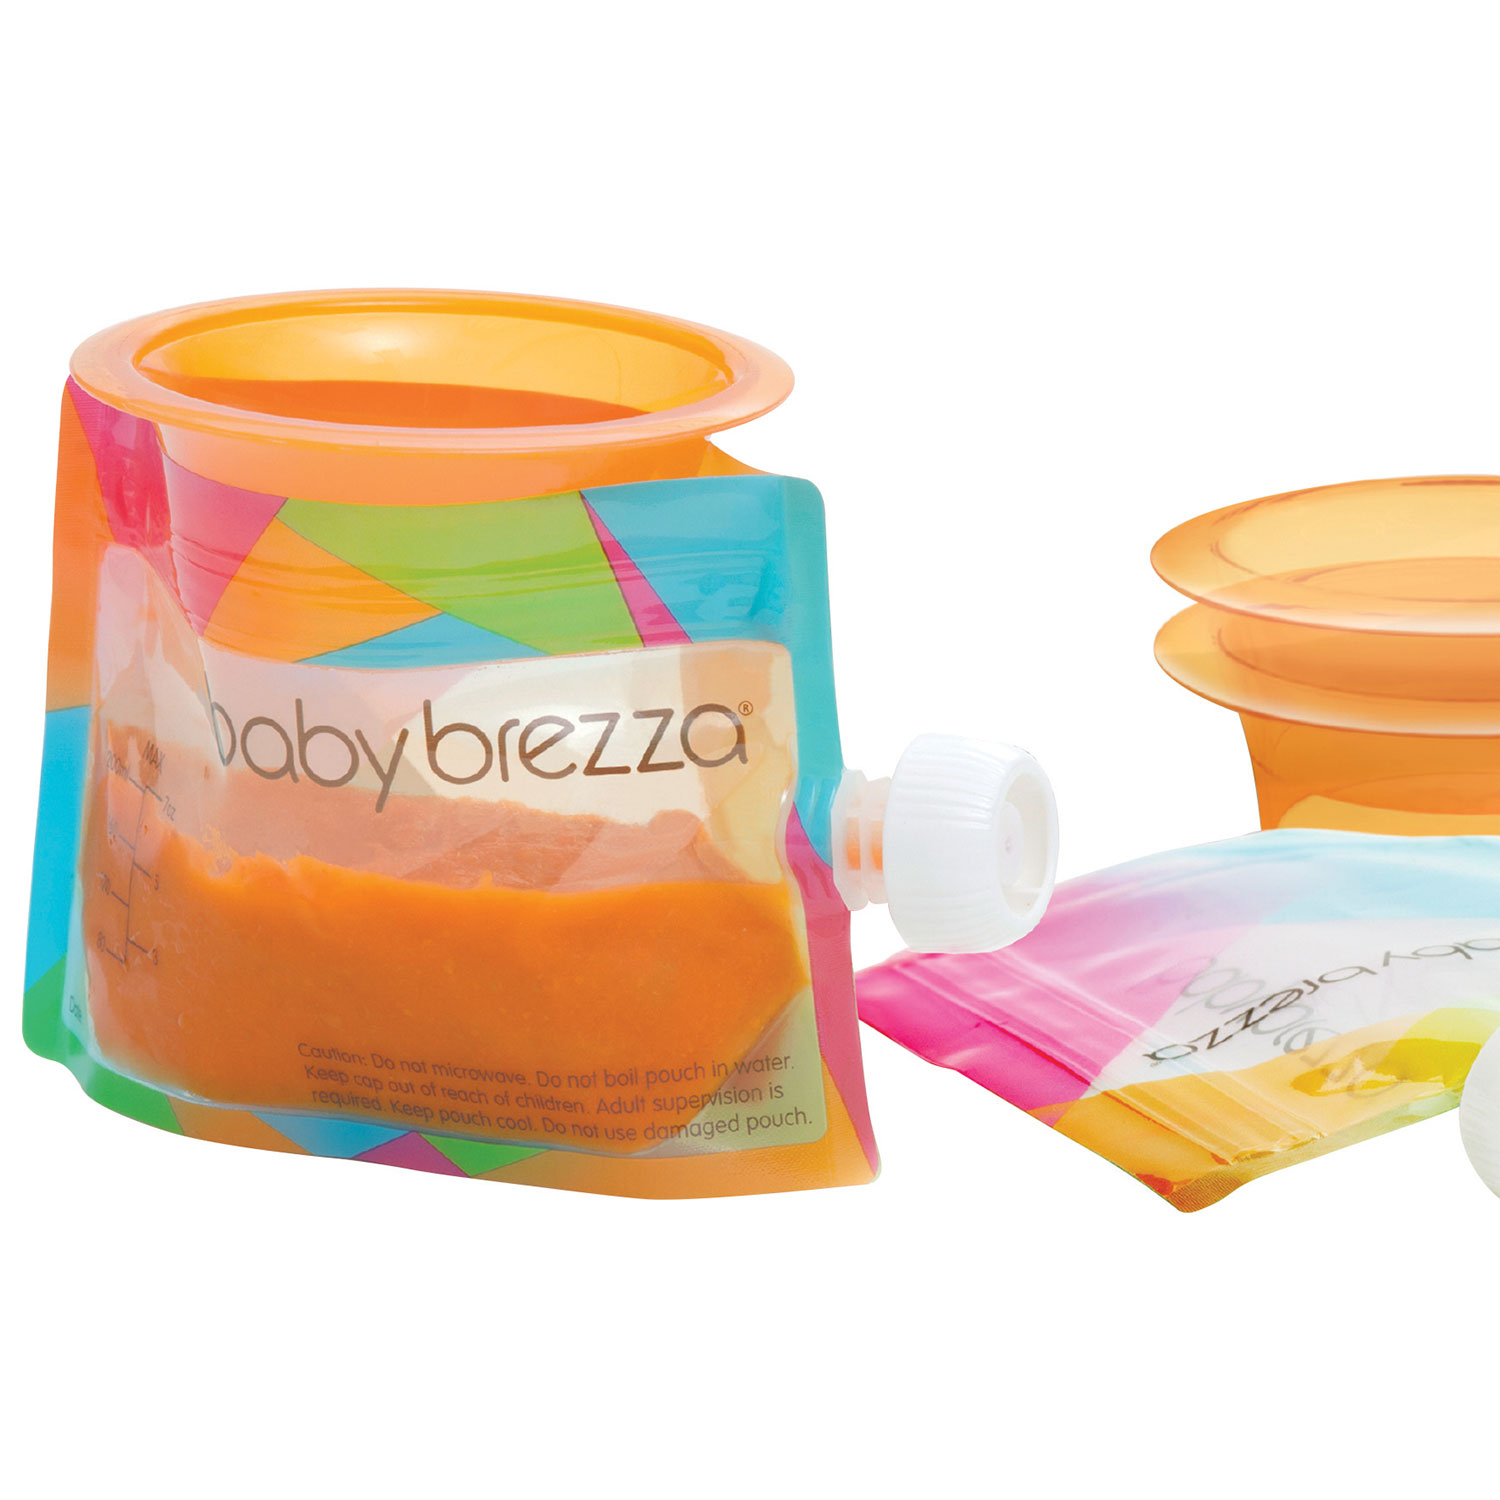 baby brezza overview - baby brezza reusable food pouches